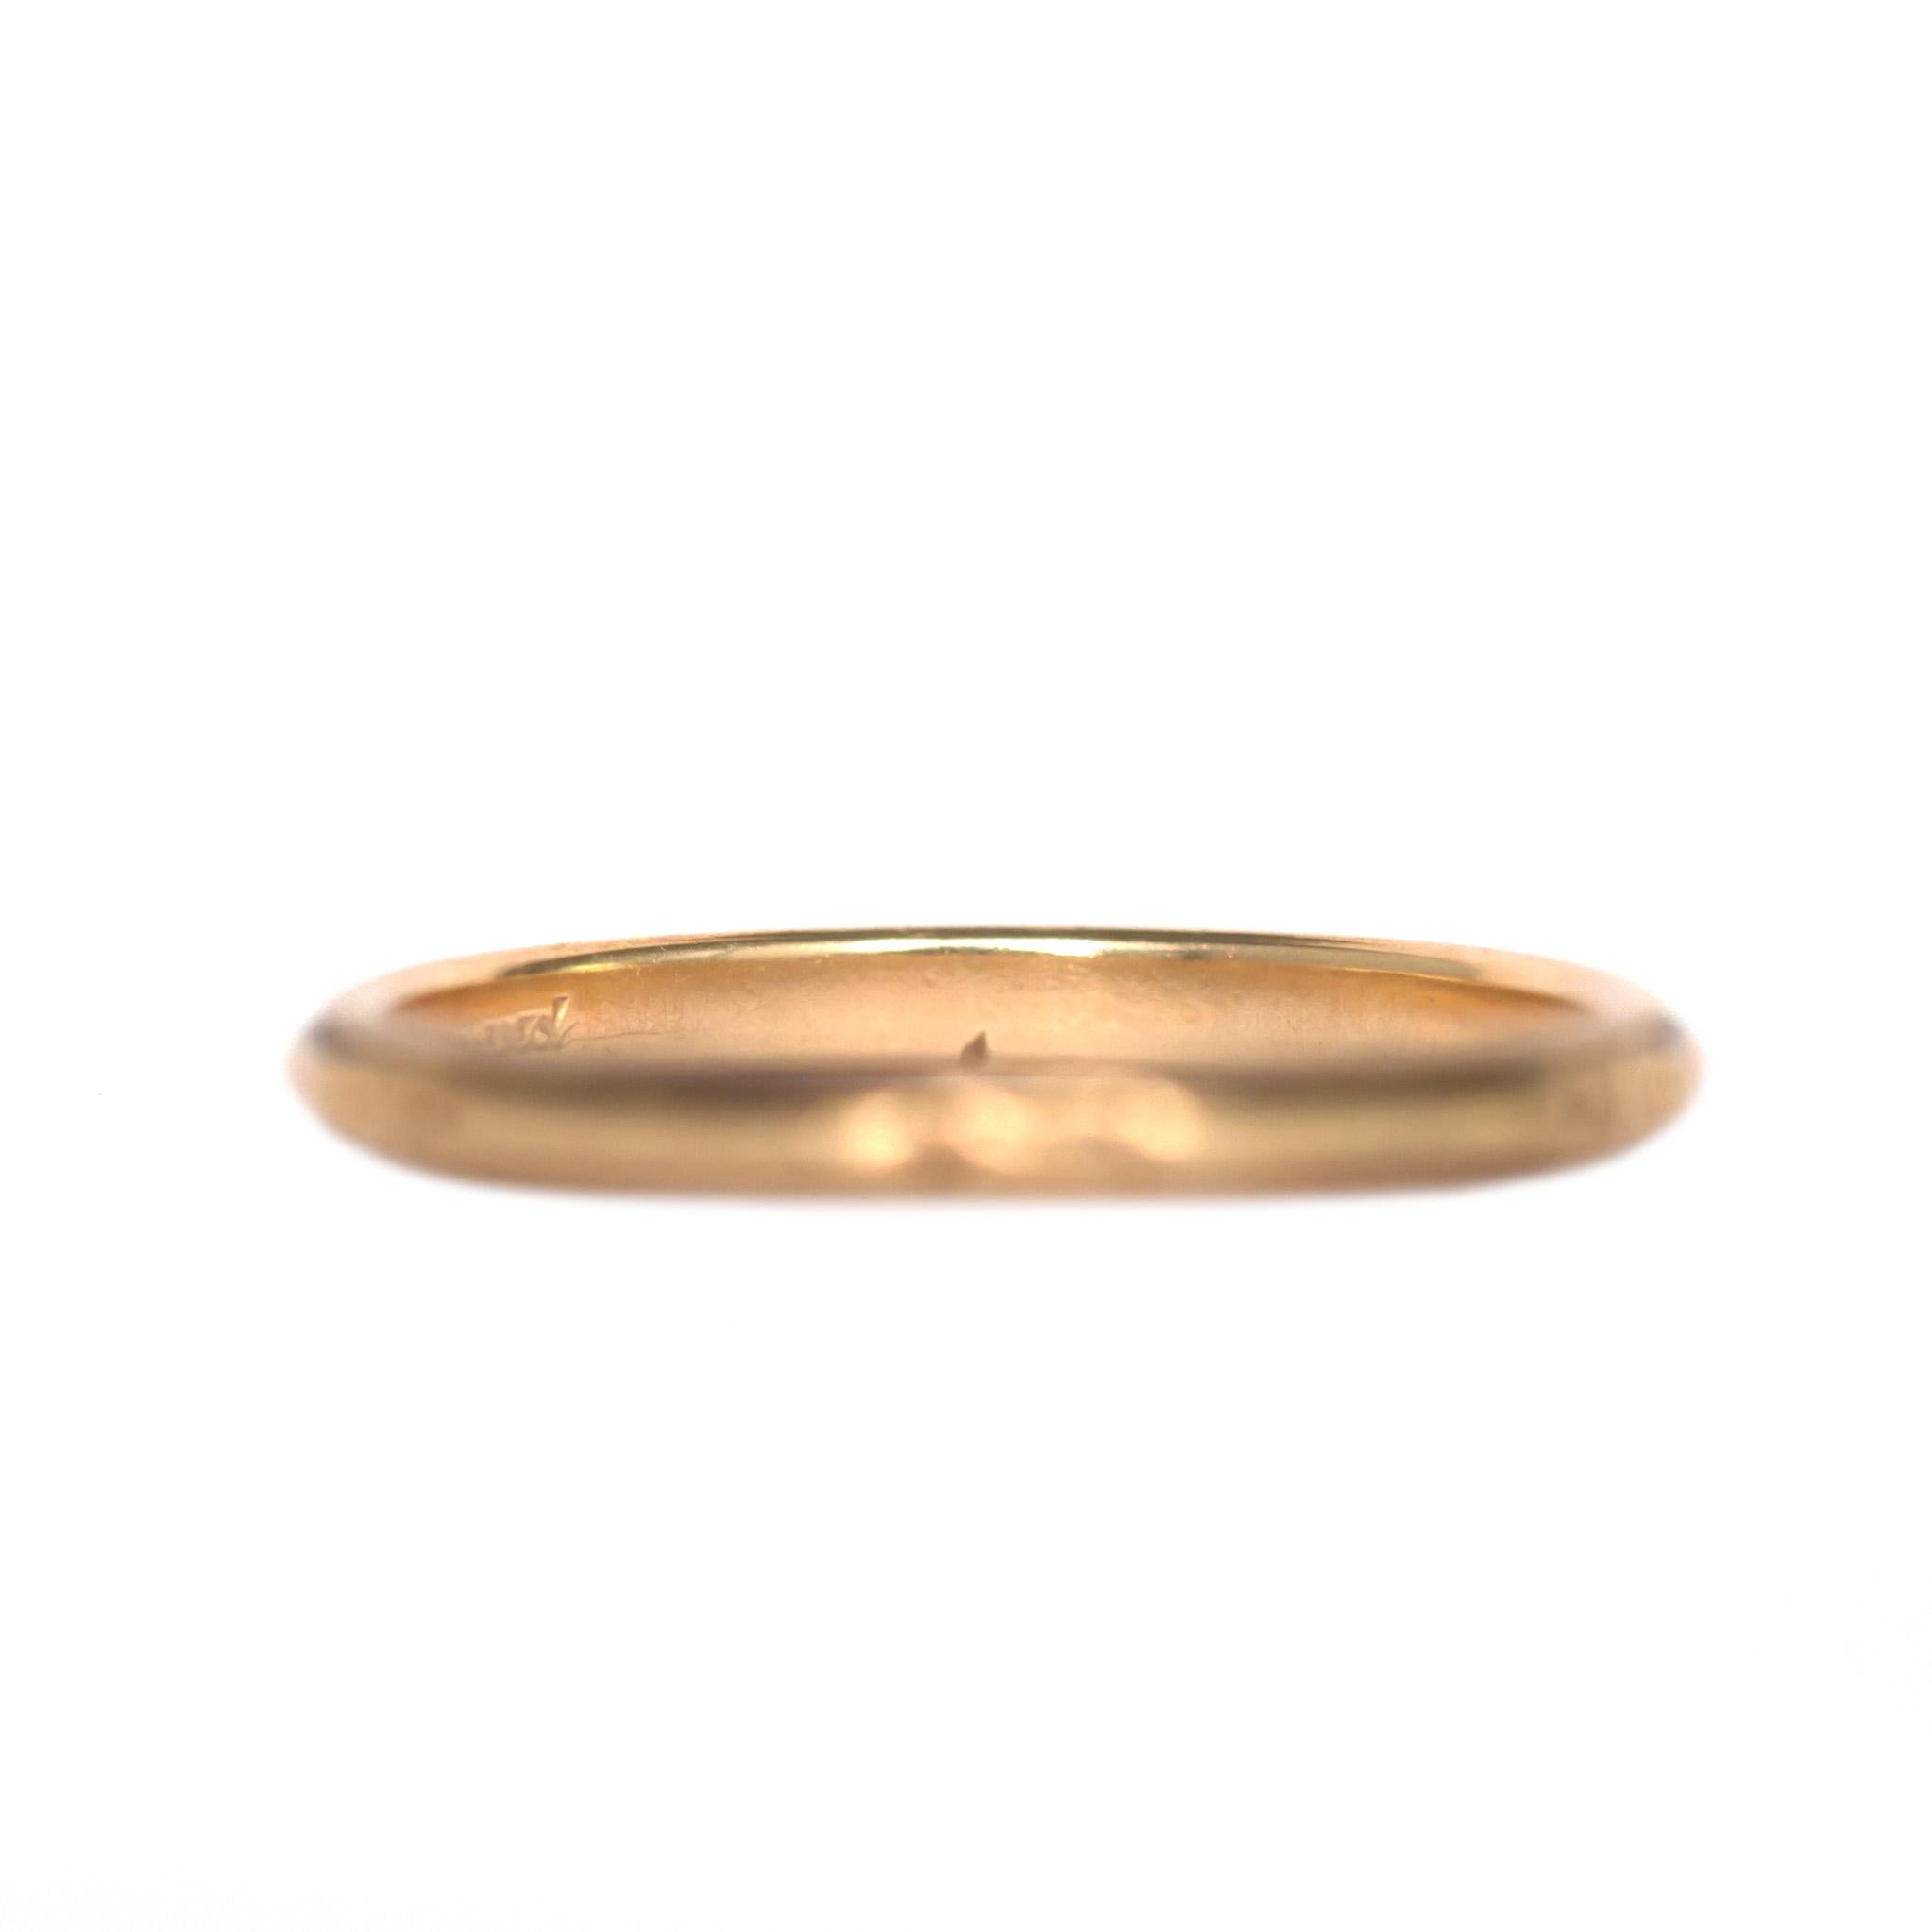 Ring Size: 7.5
Metal Type: 14 karat Yellow Gold [Hallmarked, and Tested]
Weight:  1.5  grams

Finger to Top of Stone Measurement: 1mm
Condition:  Excellent